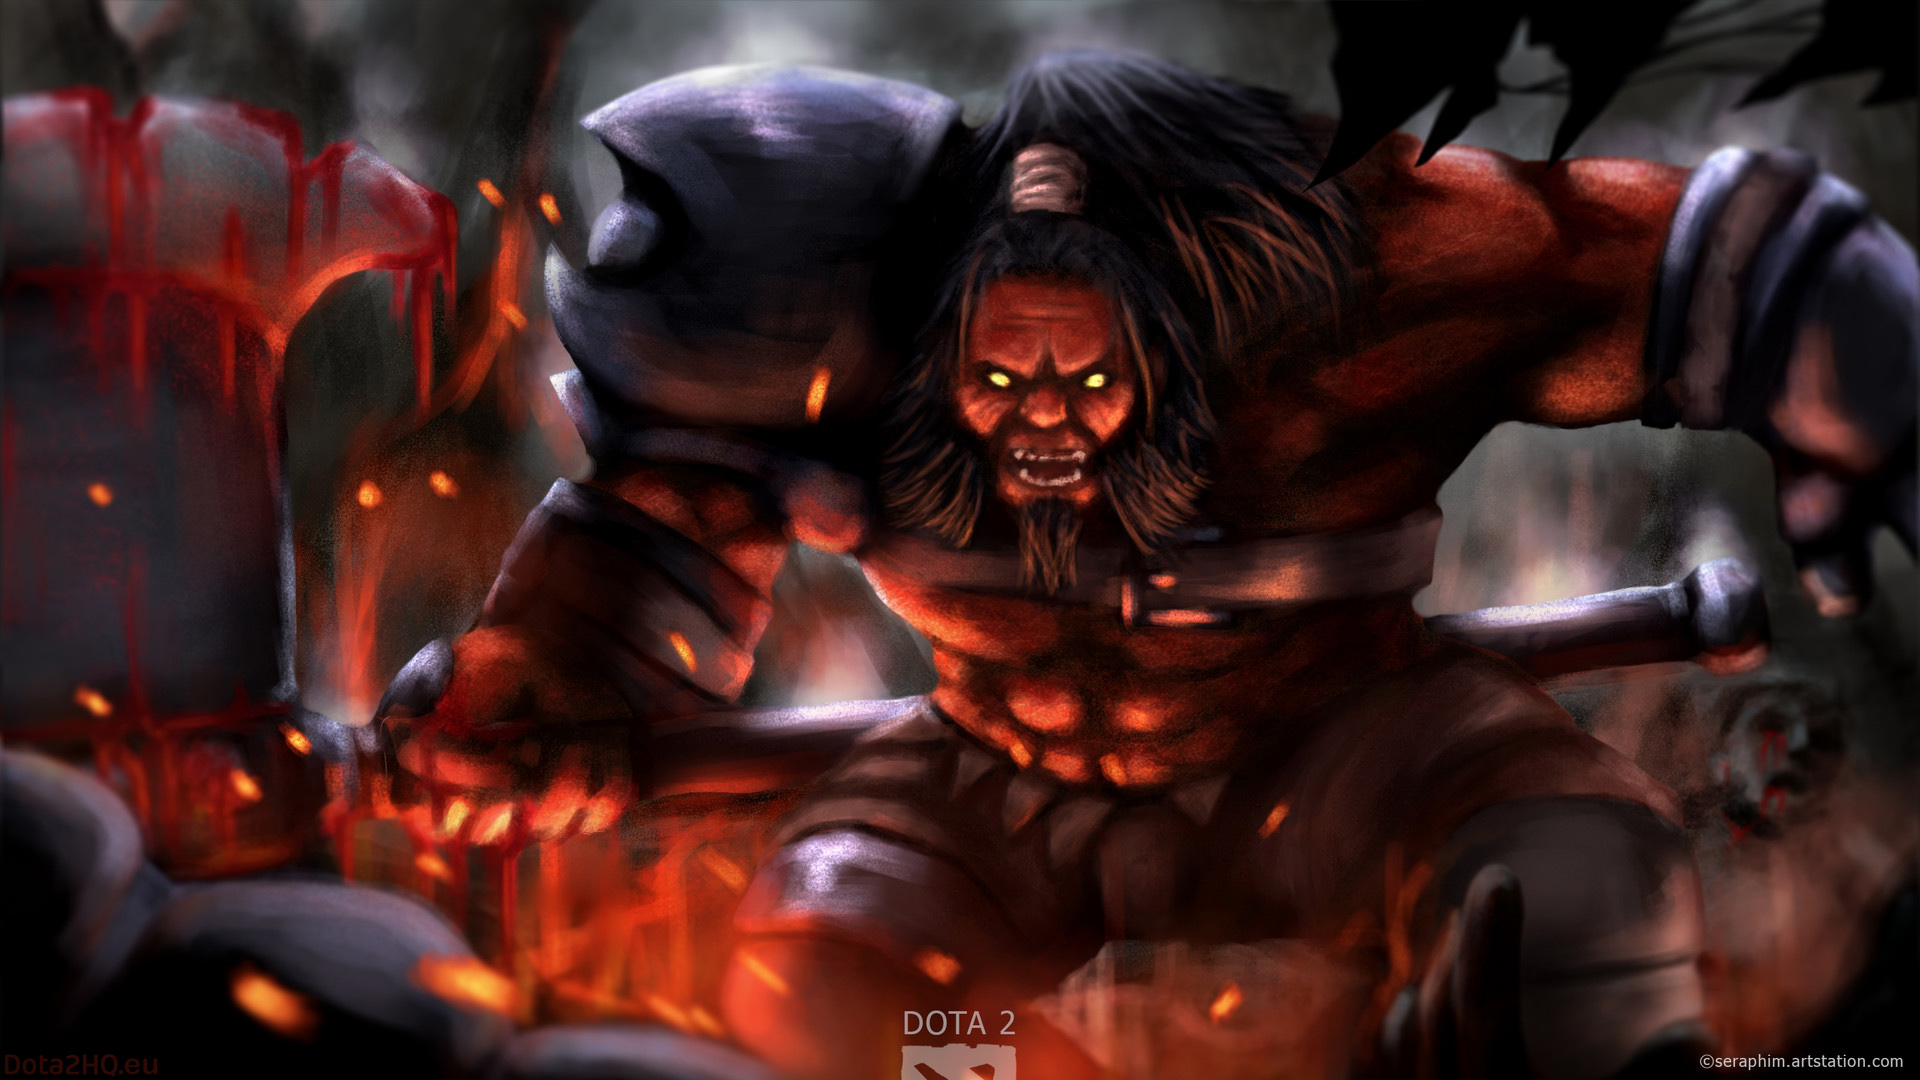 DOTA 2 Axe Picture 2 Game Wallpaper Gallery